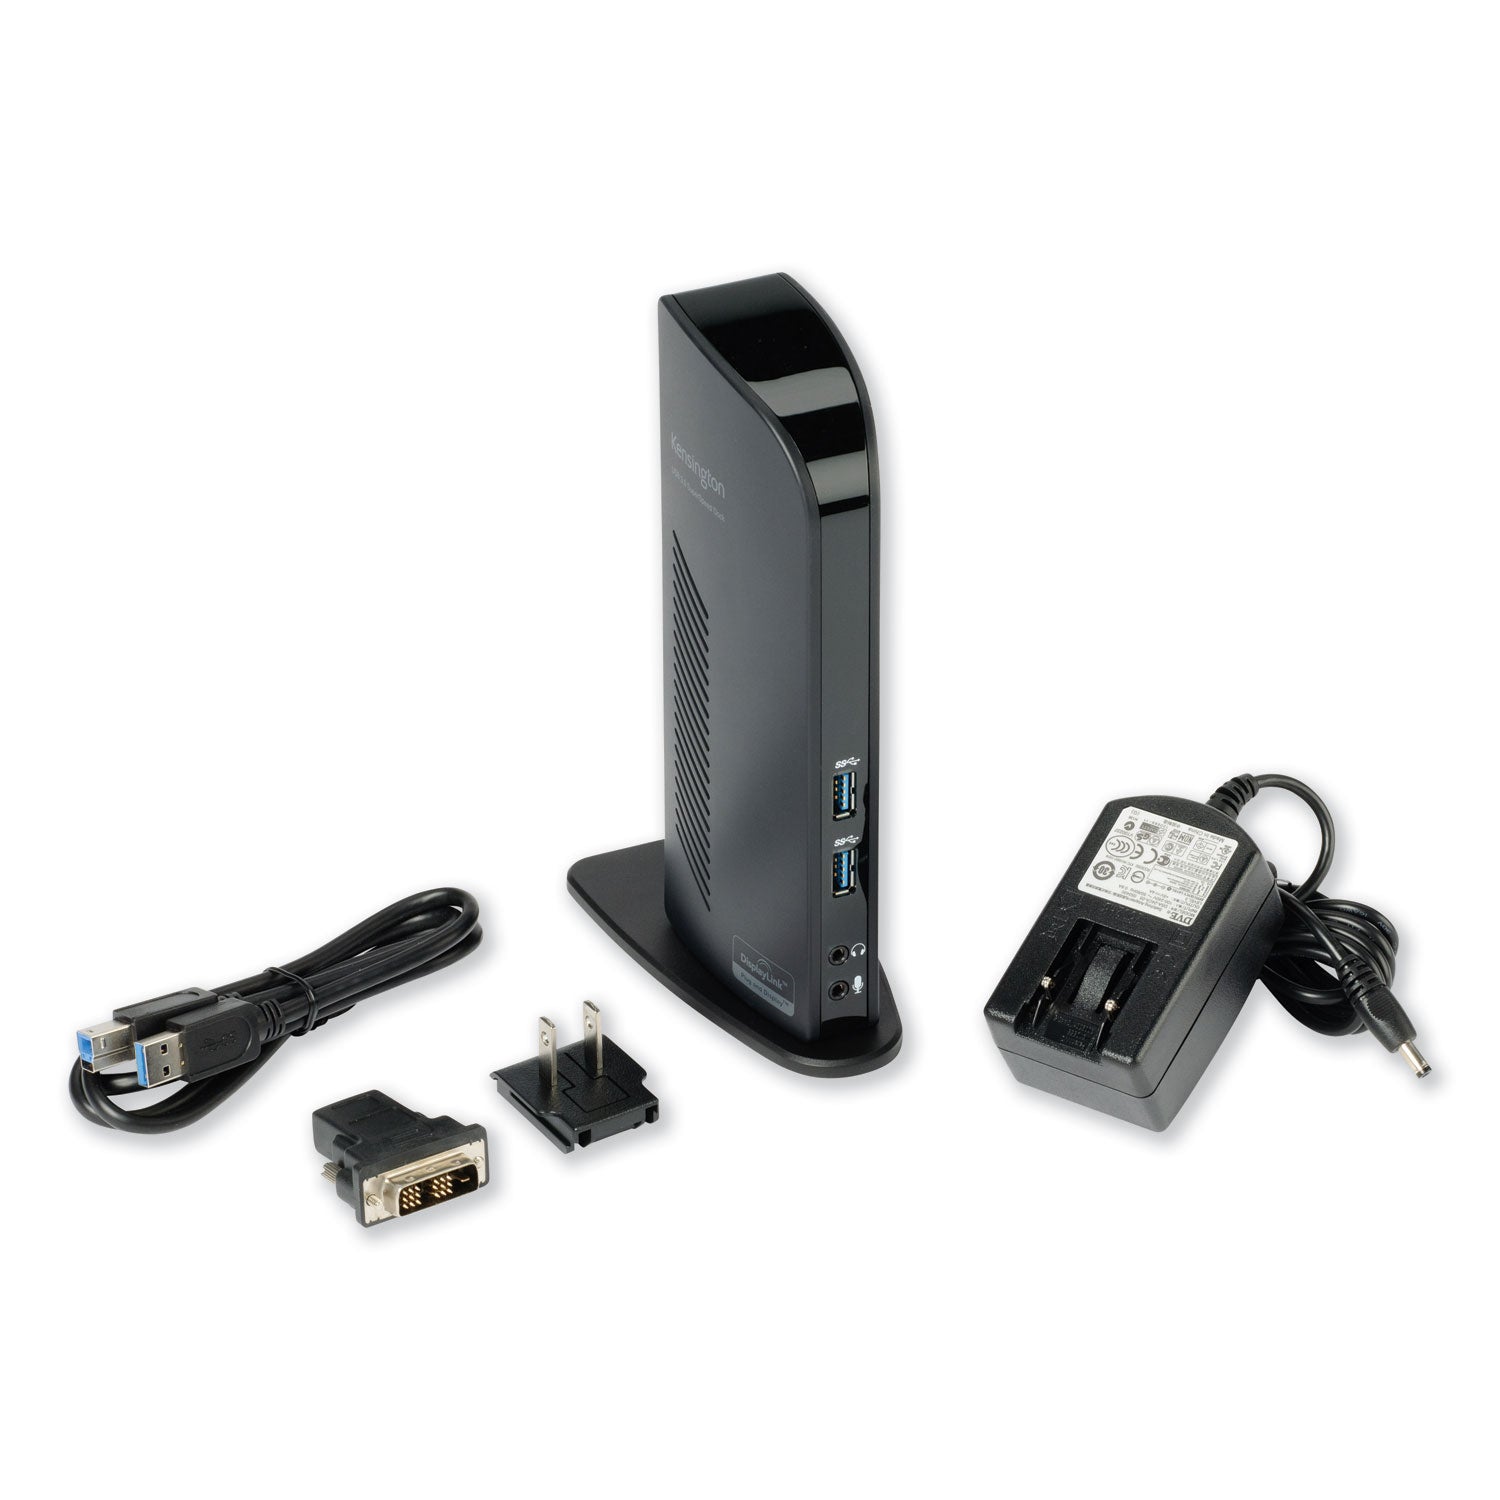 usb-30-docking-station-with-dvi-hdmi-vga-video-1-dvi-and-1-hdmi-out_kmw33972 - 6